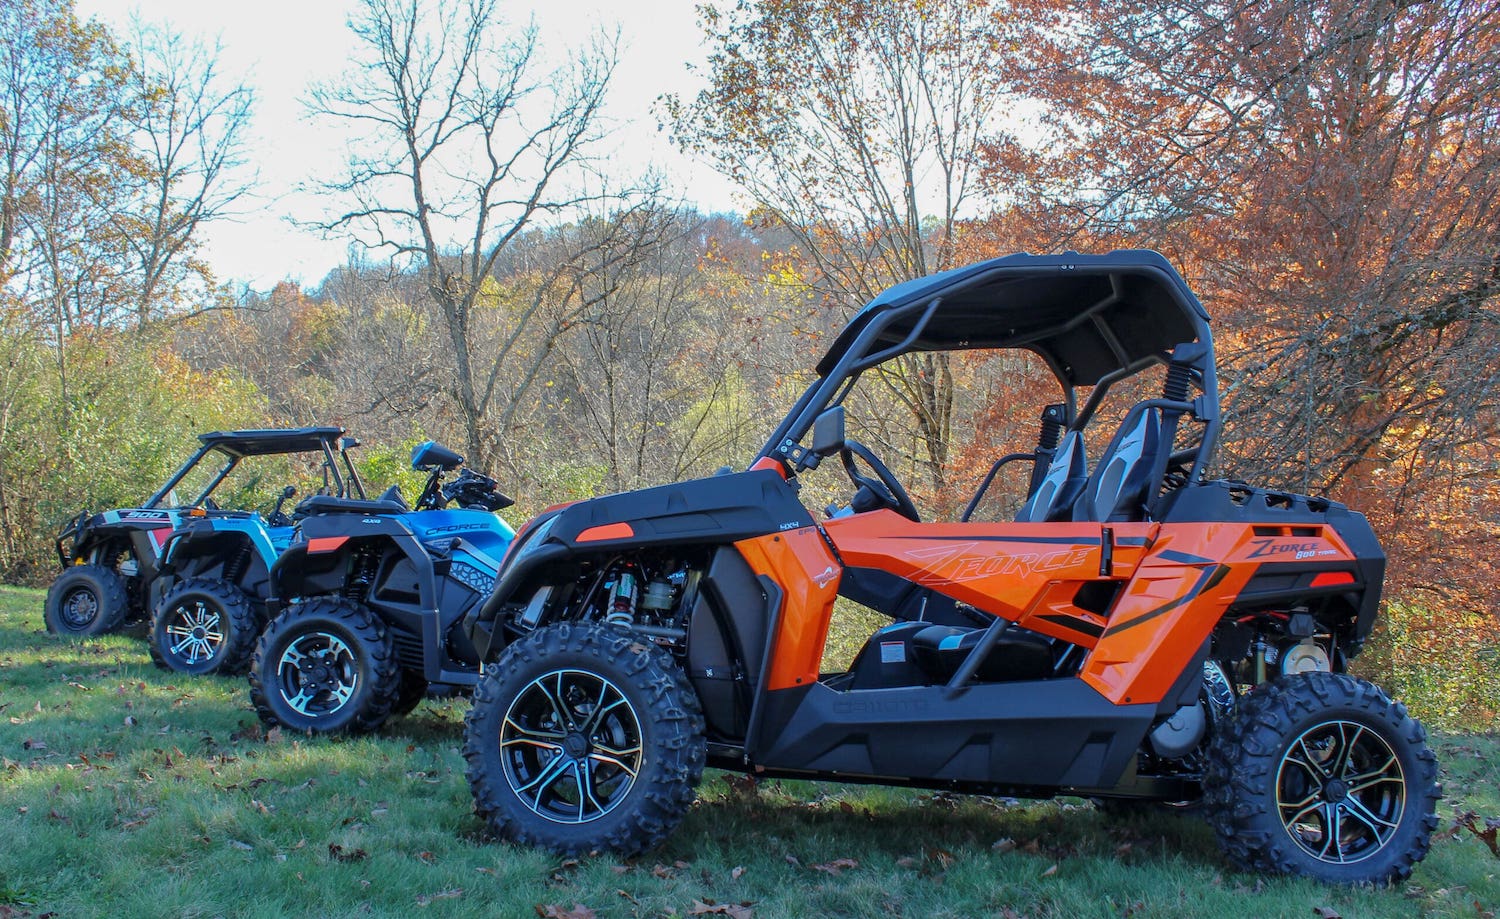 ATV, UTVs, and Side by Sides